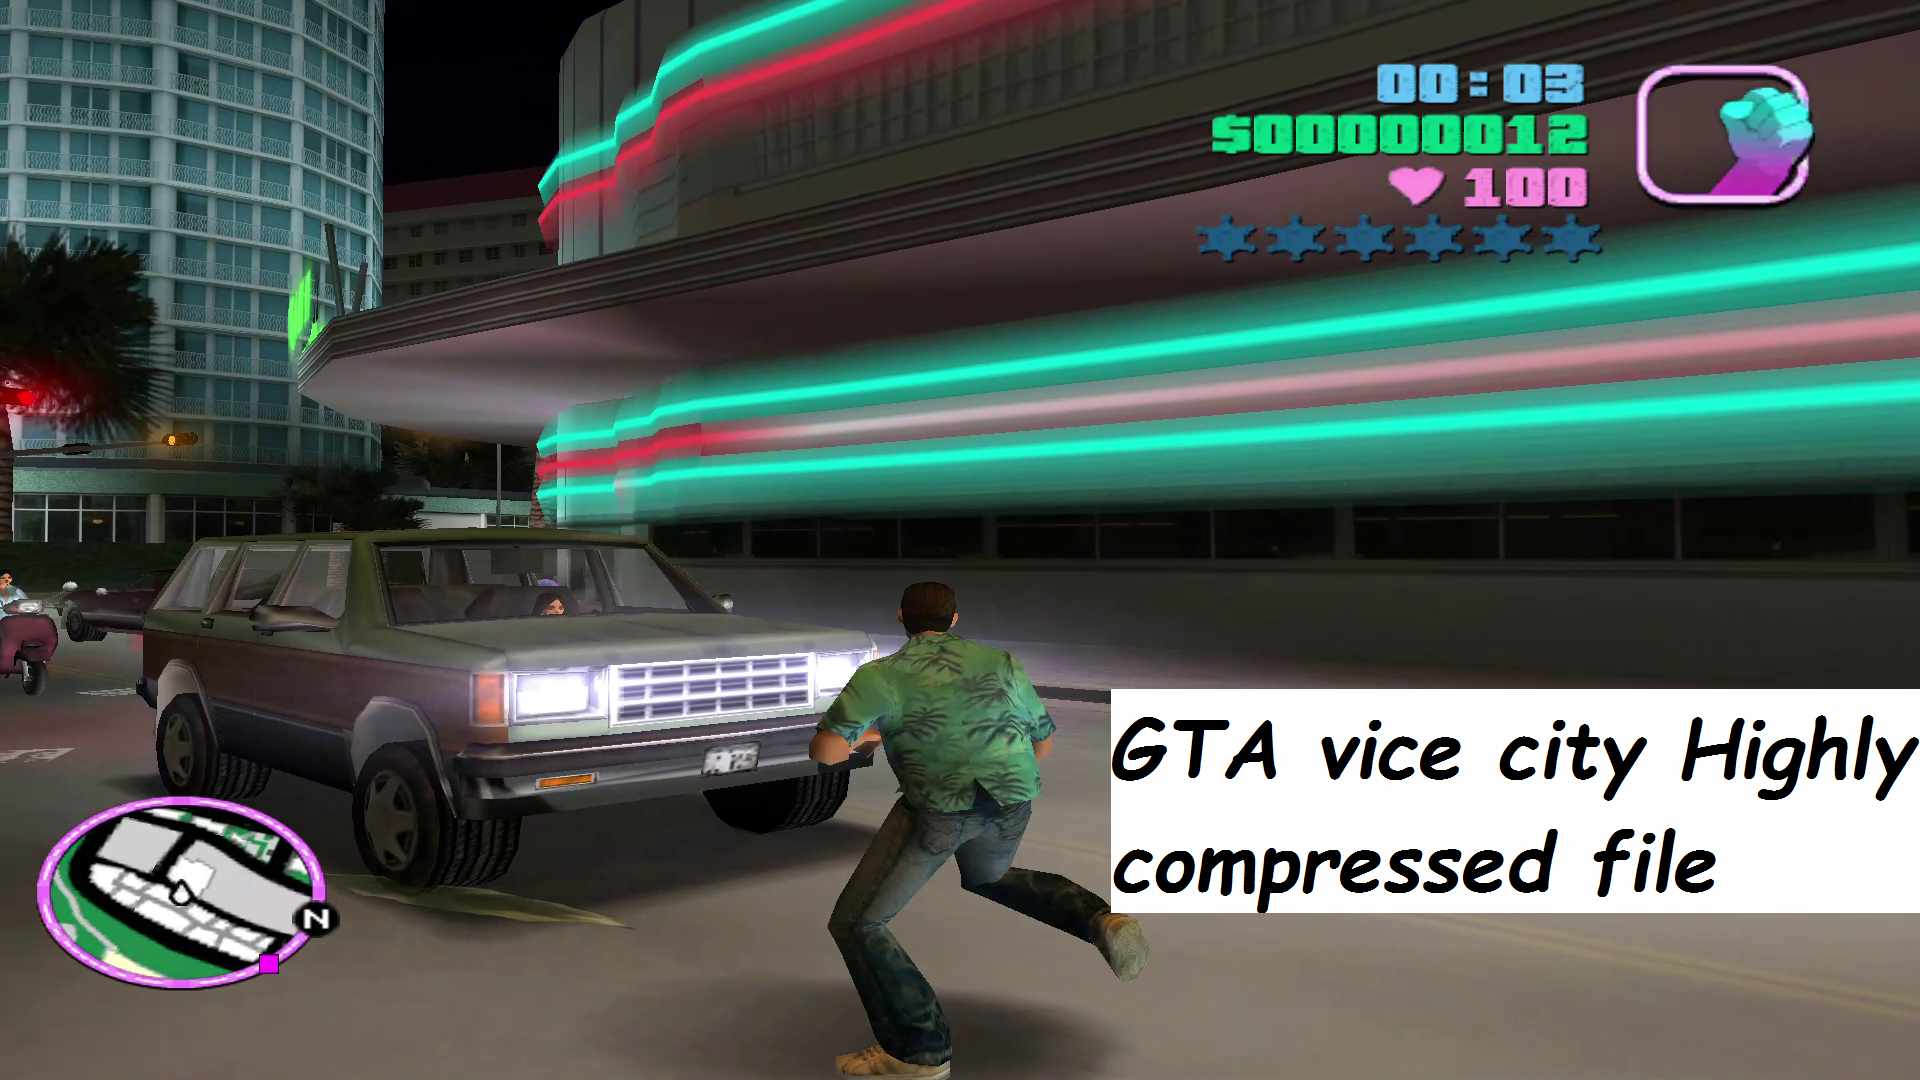 Gta vice city highly compressed 290mb